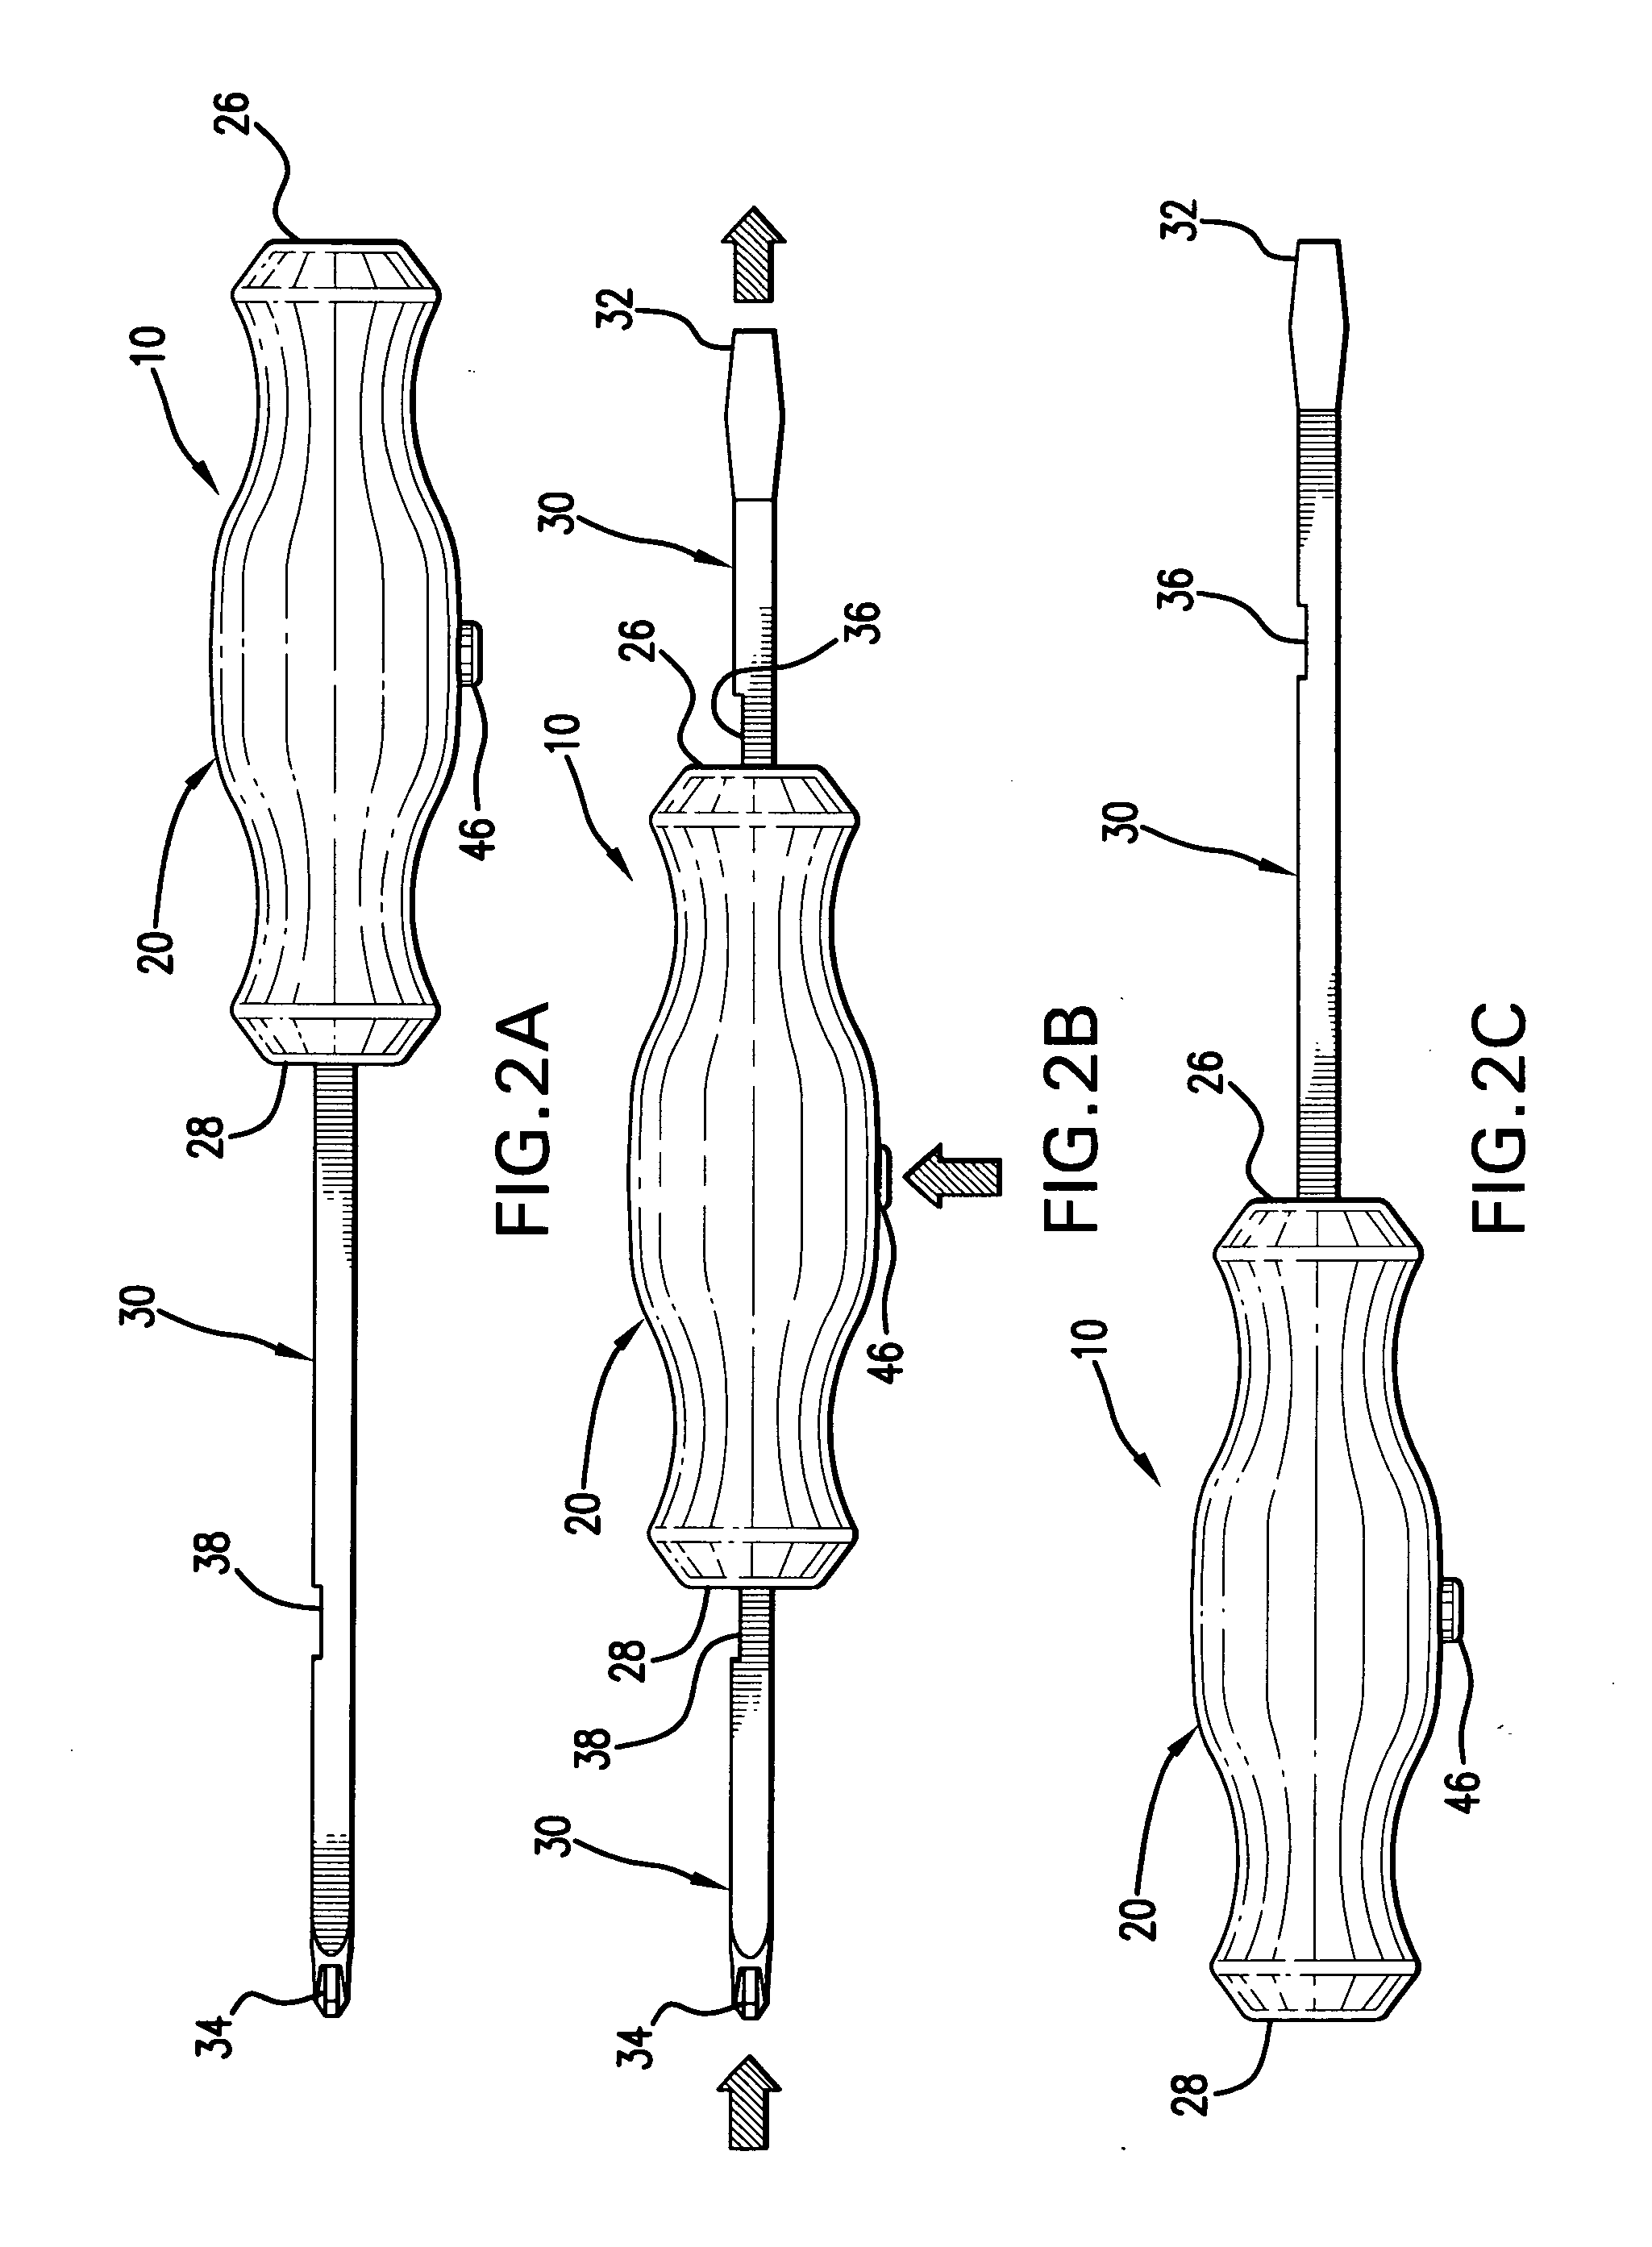 Screwdriver with dual headed axial shaft